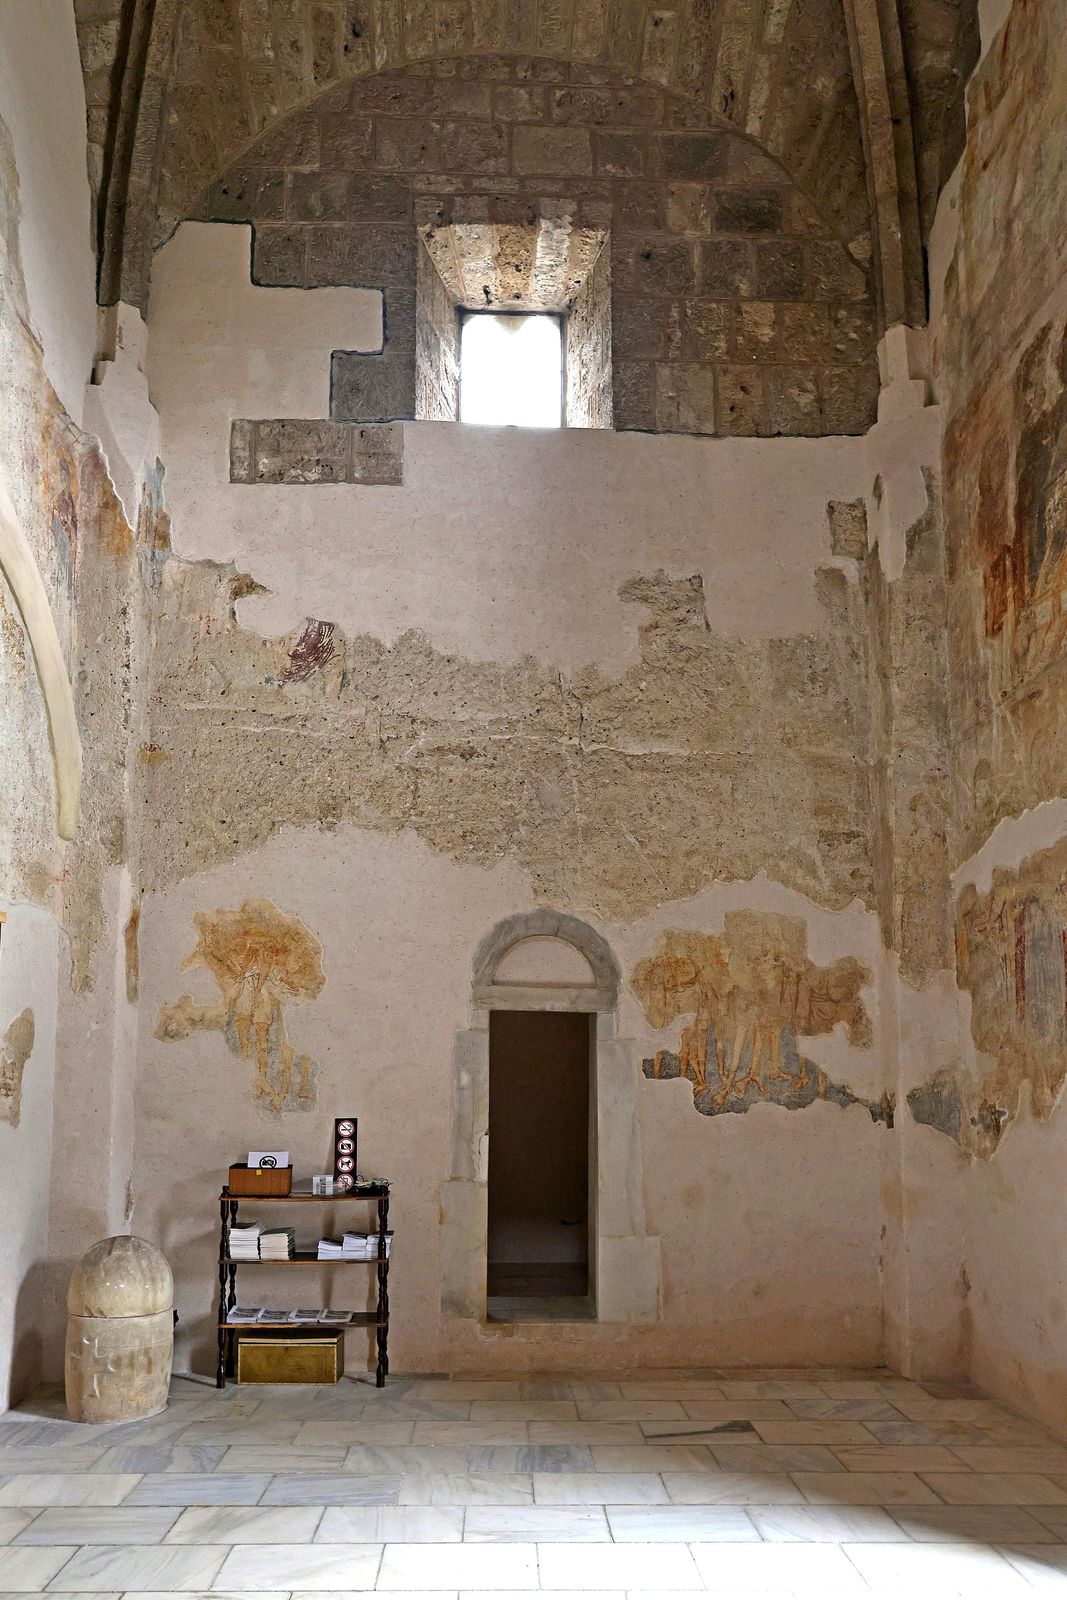 South wall of the narthex